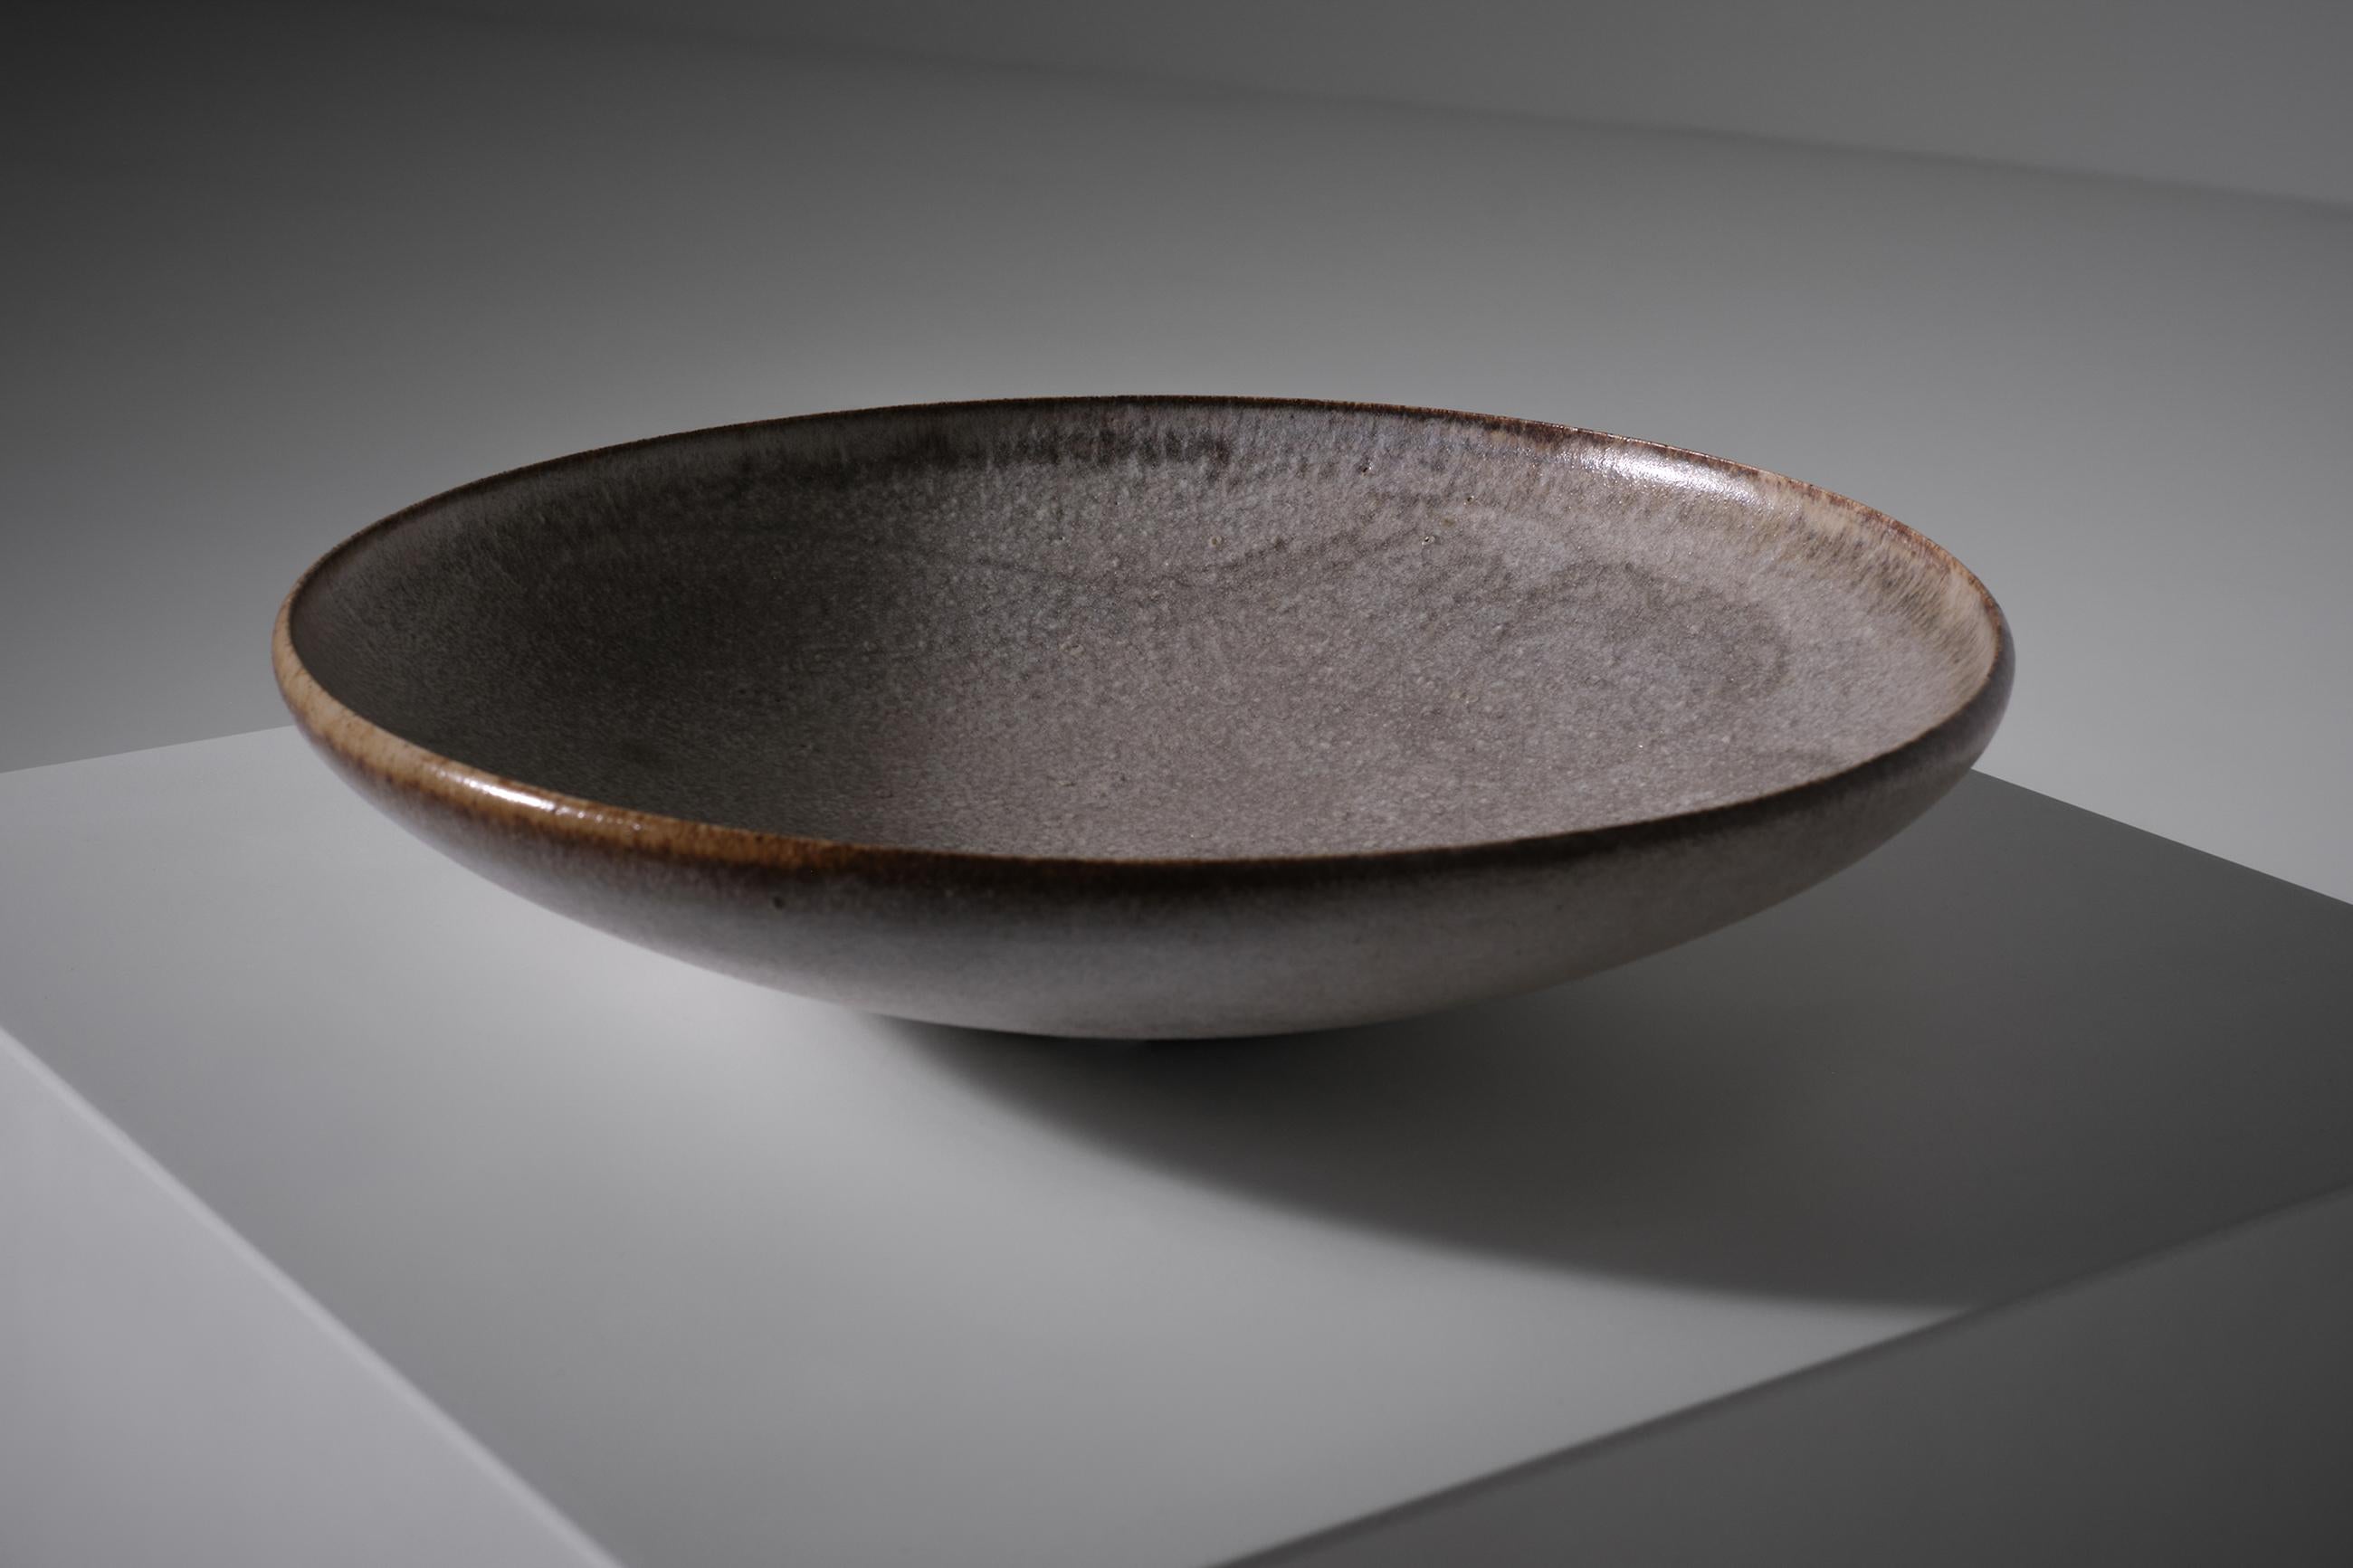 Rare large bowl by Carlo Zauli, Italy, 1970. Nice large bowl in a light greyish clay with nice warm taupe undertone. The bowl has nice minimal organic design at the inside of the bowl. In excellent condition. Signed on the bottom.